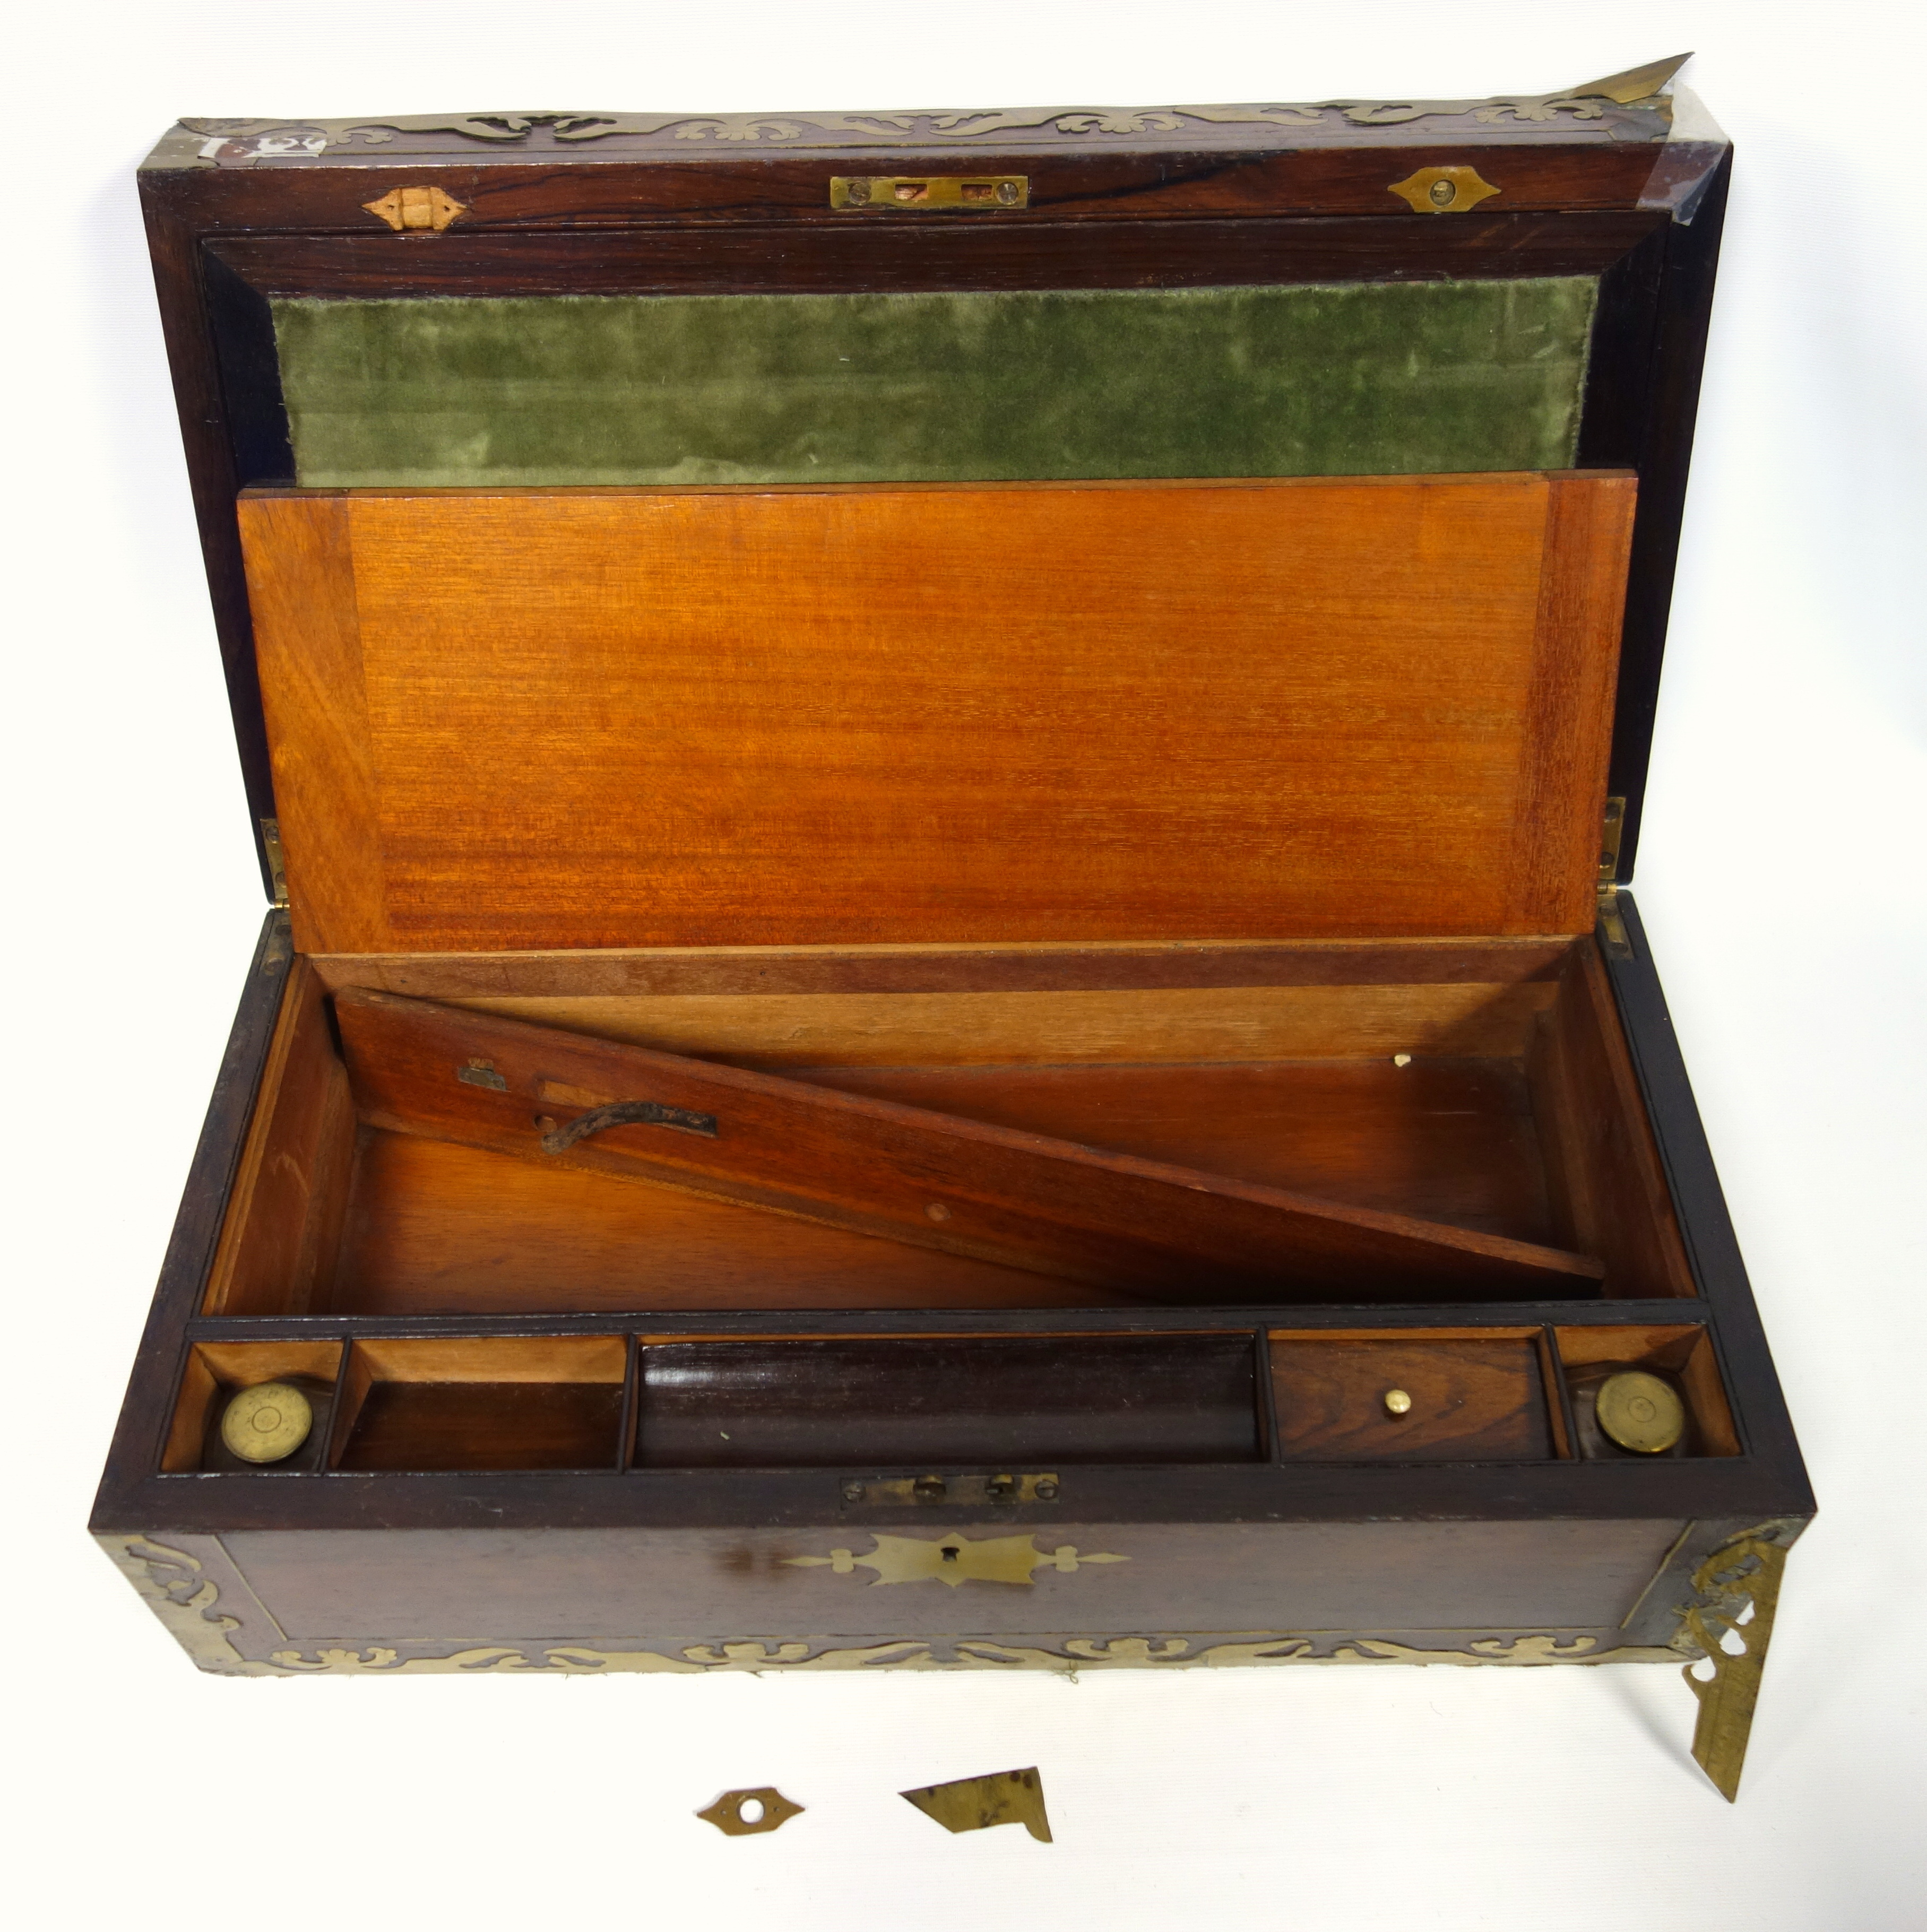 Victorian brass inlaid rosewood portable writing desk with 2 brass covered wells and secret panel - Image 5 of 14